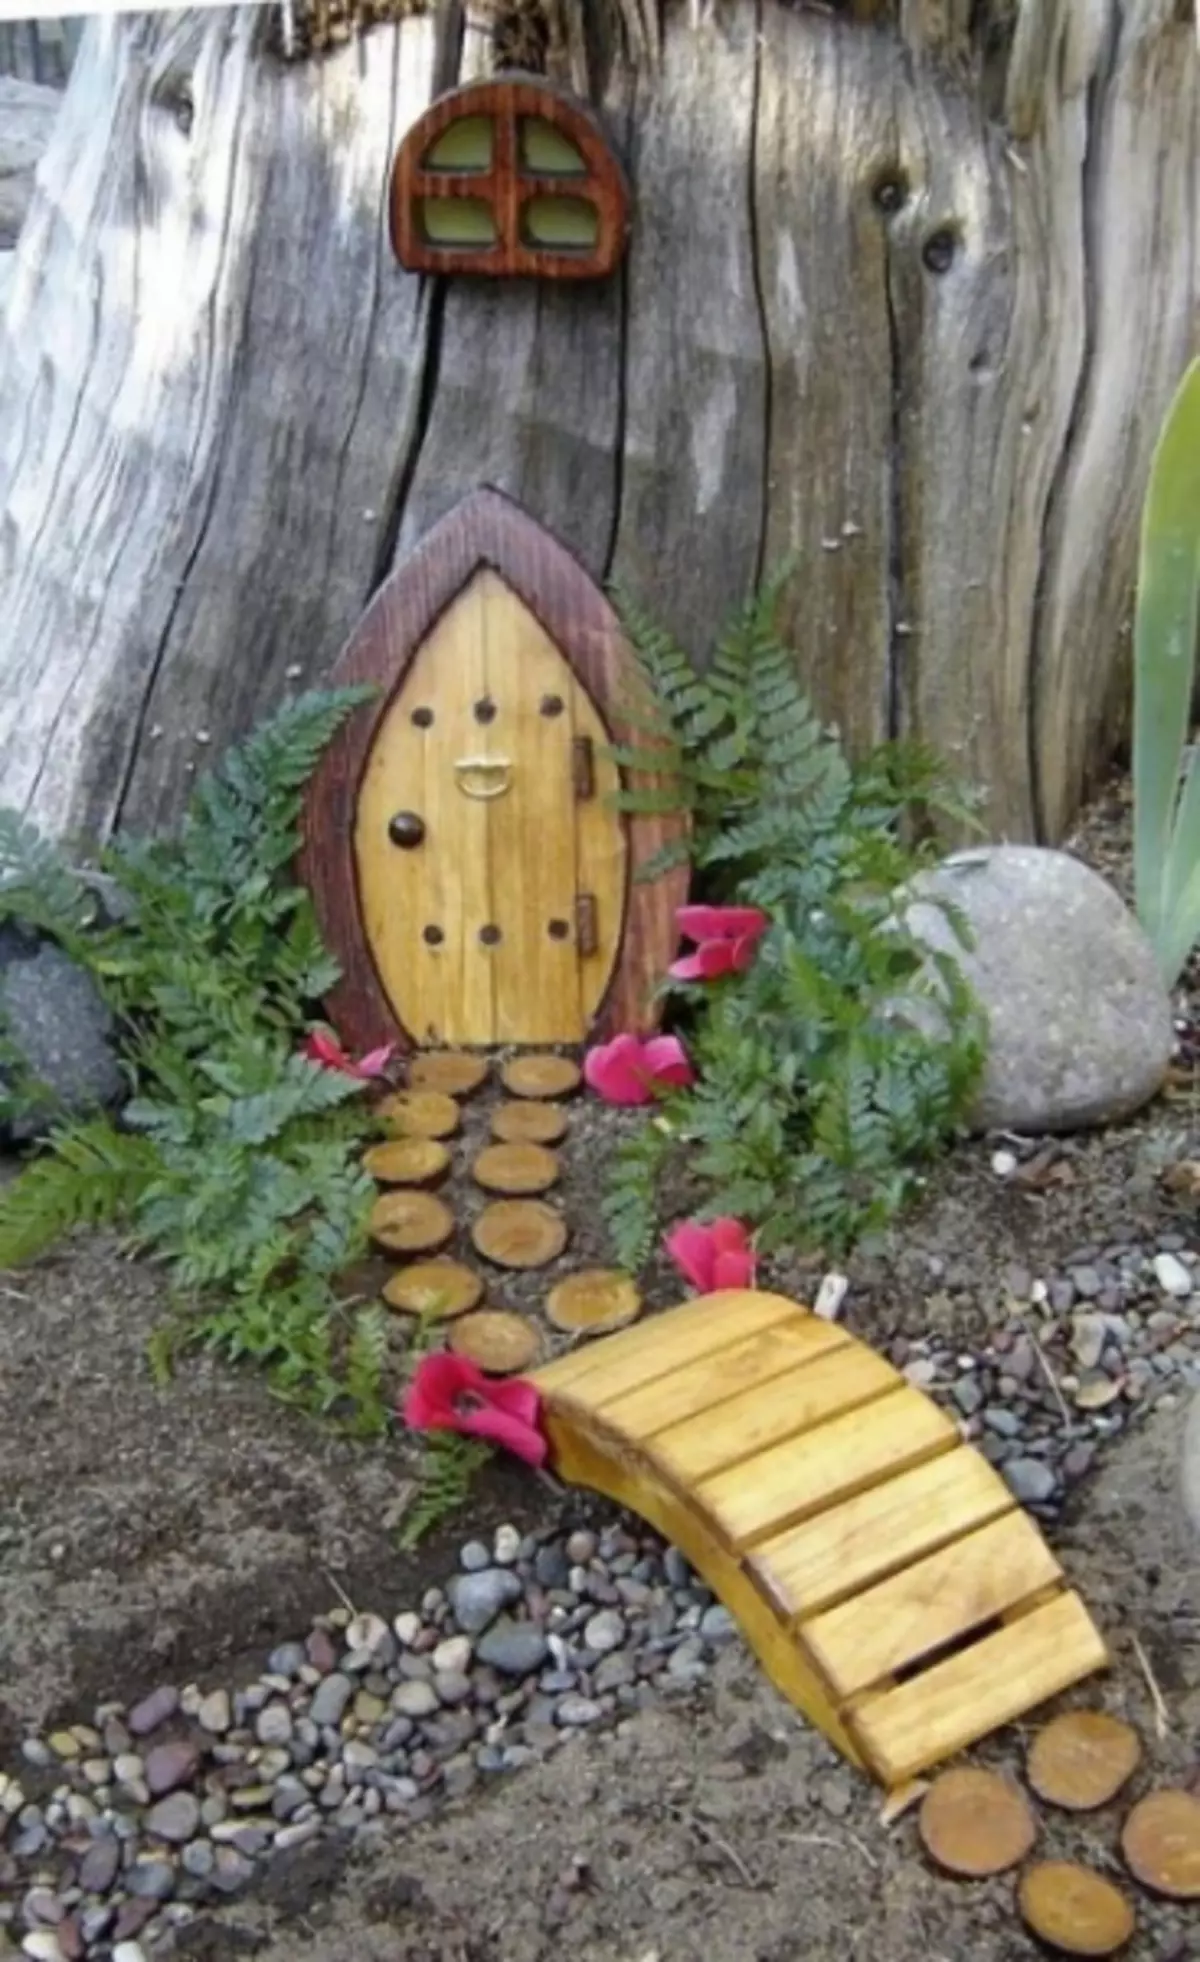 Dominics for fairies, elves and gnomes in the garden at the cottage (20 photos)